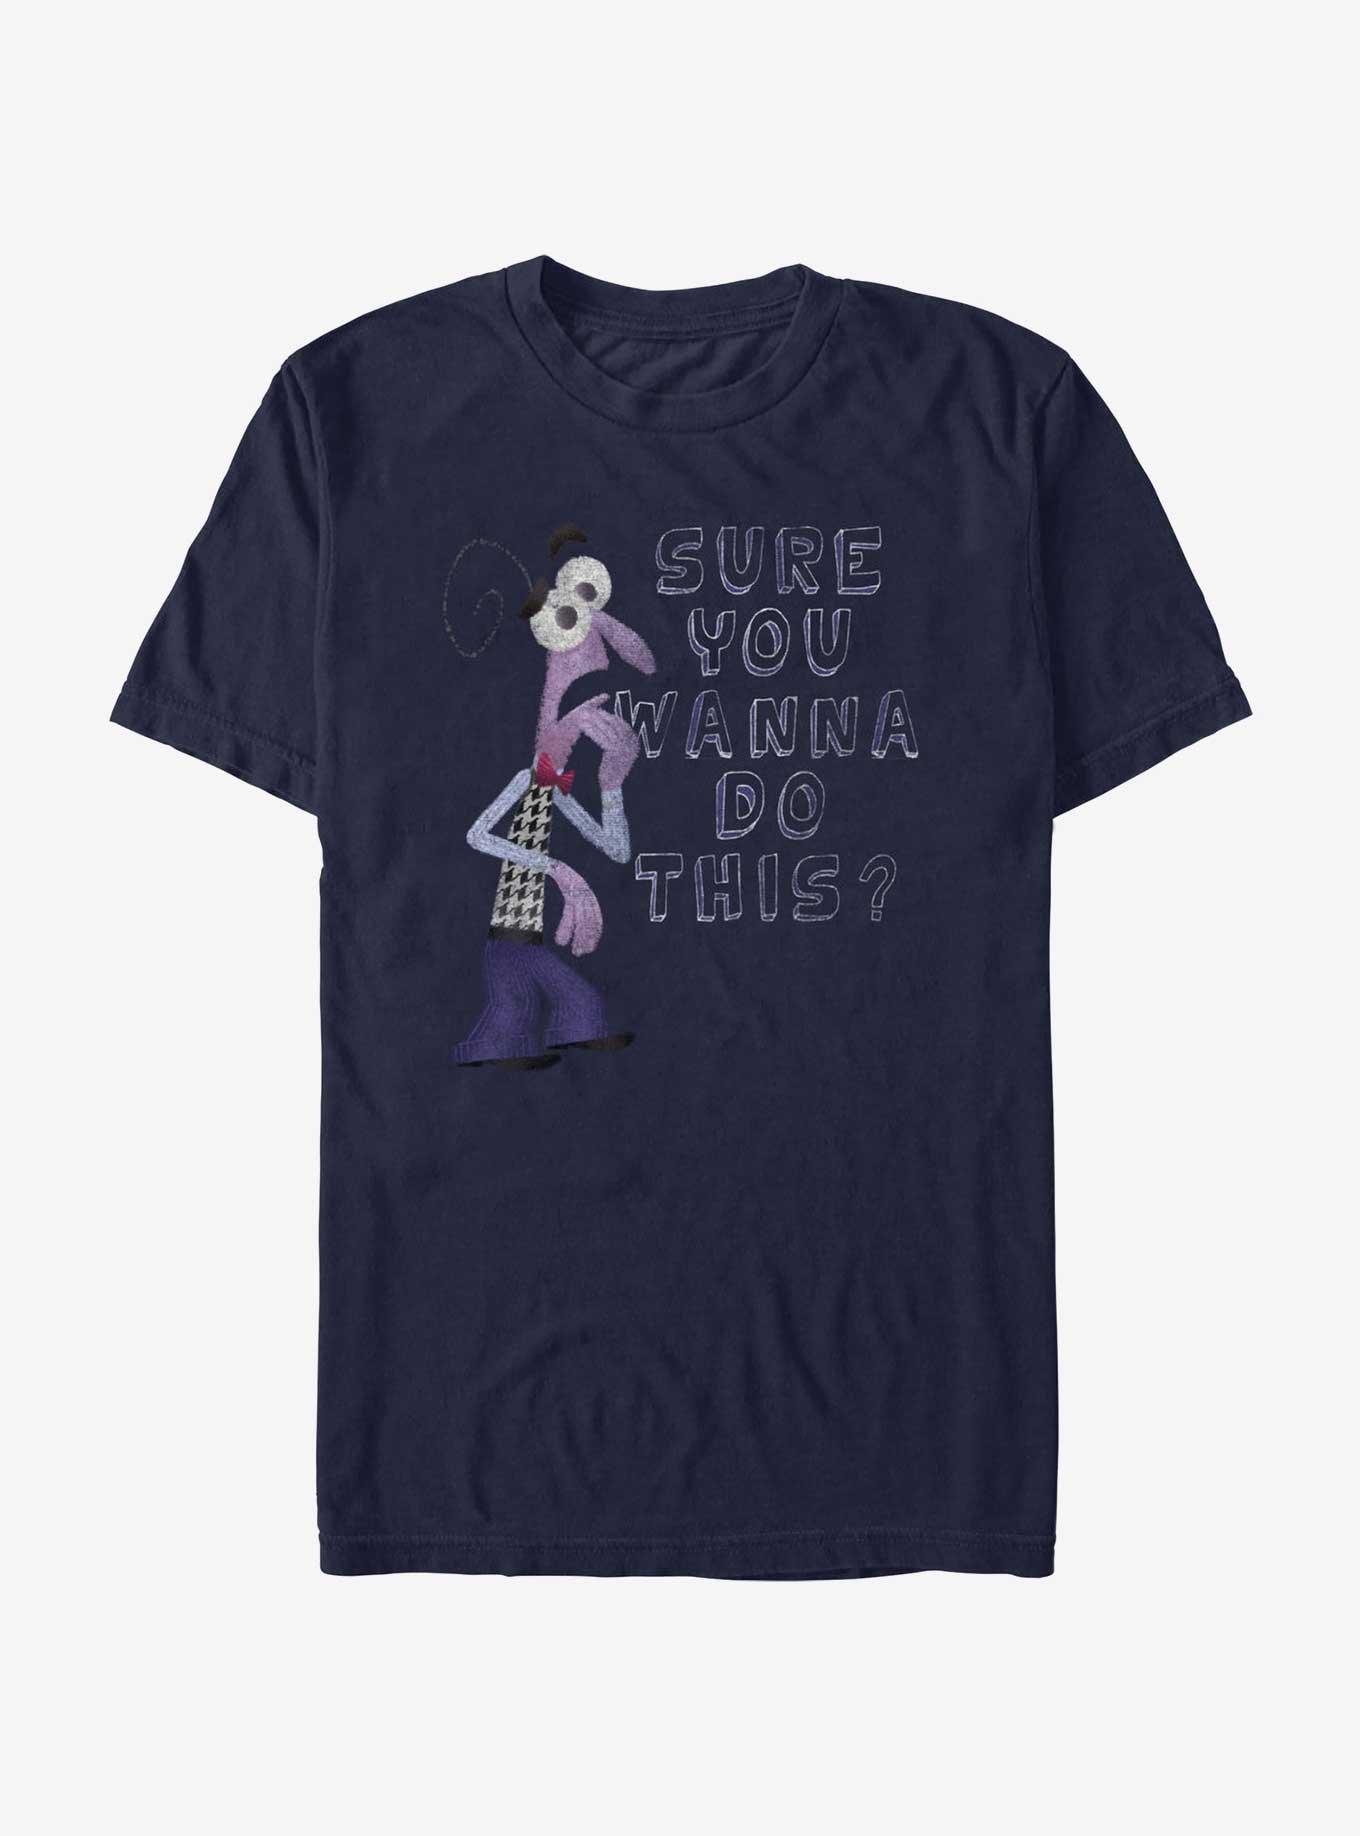 Disney Pixar Inside Out 2 Fear You Sure You Wanna Do This T-Shirt, NAVY, hi-res